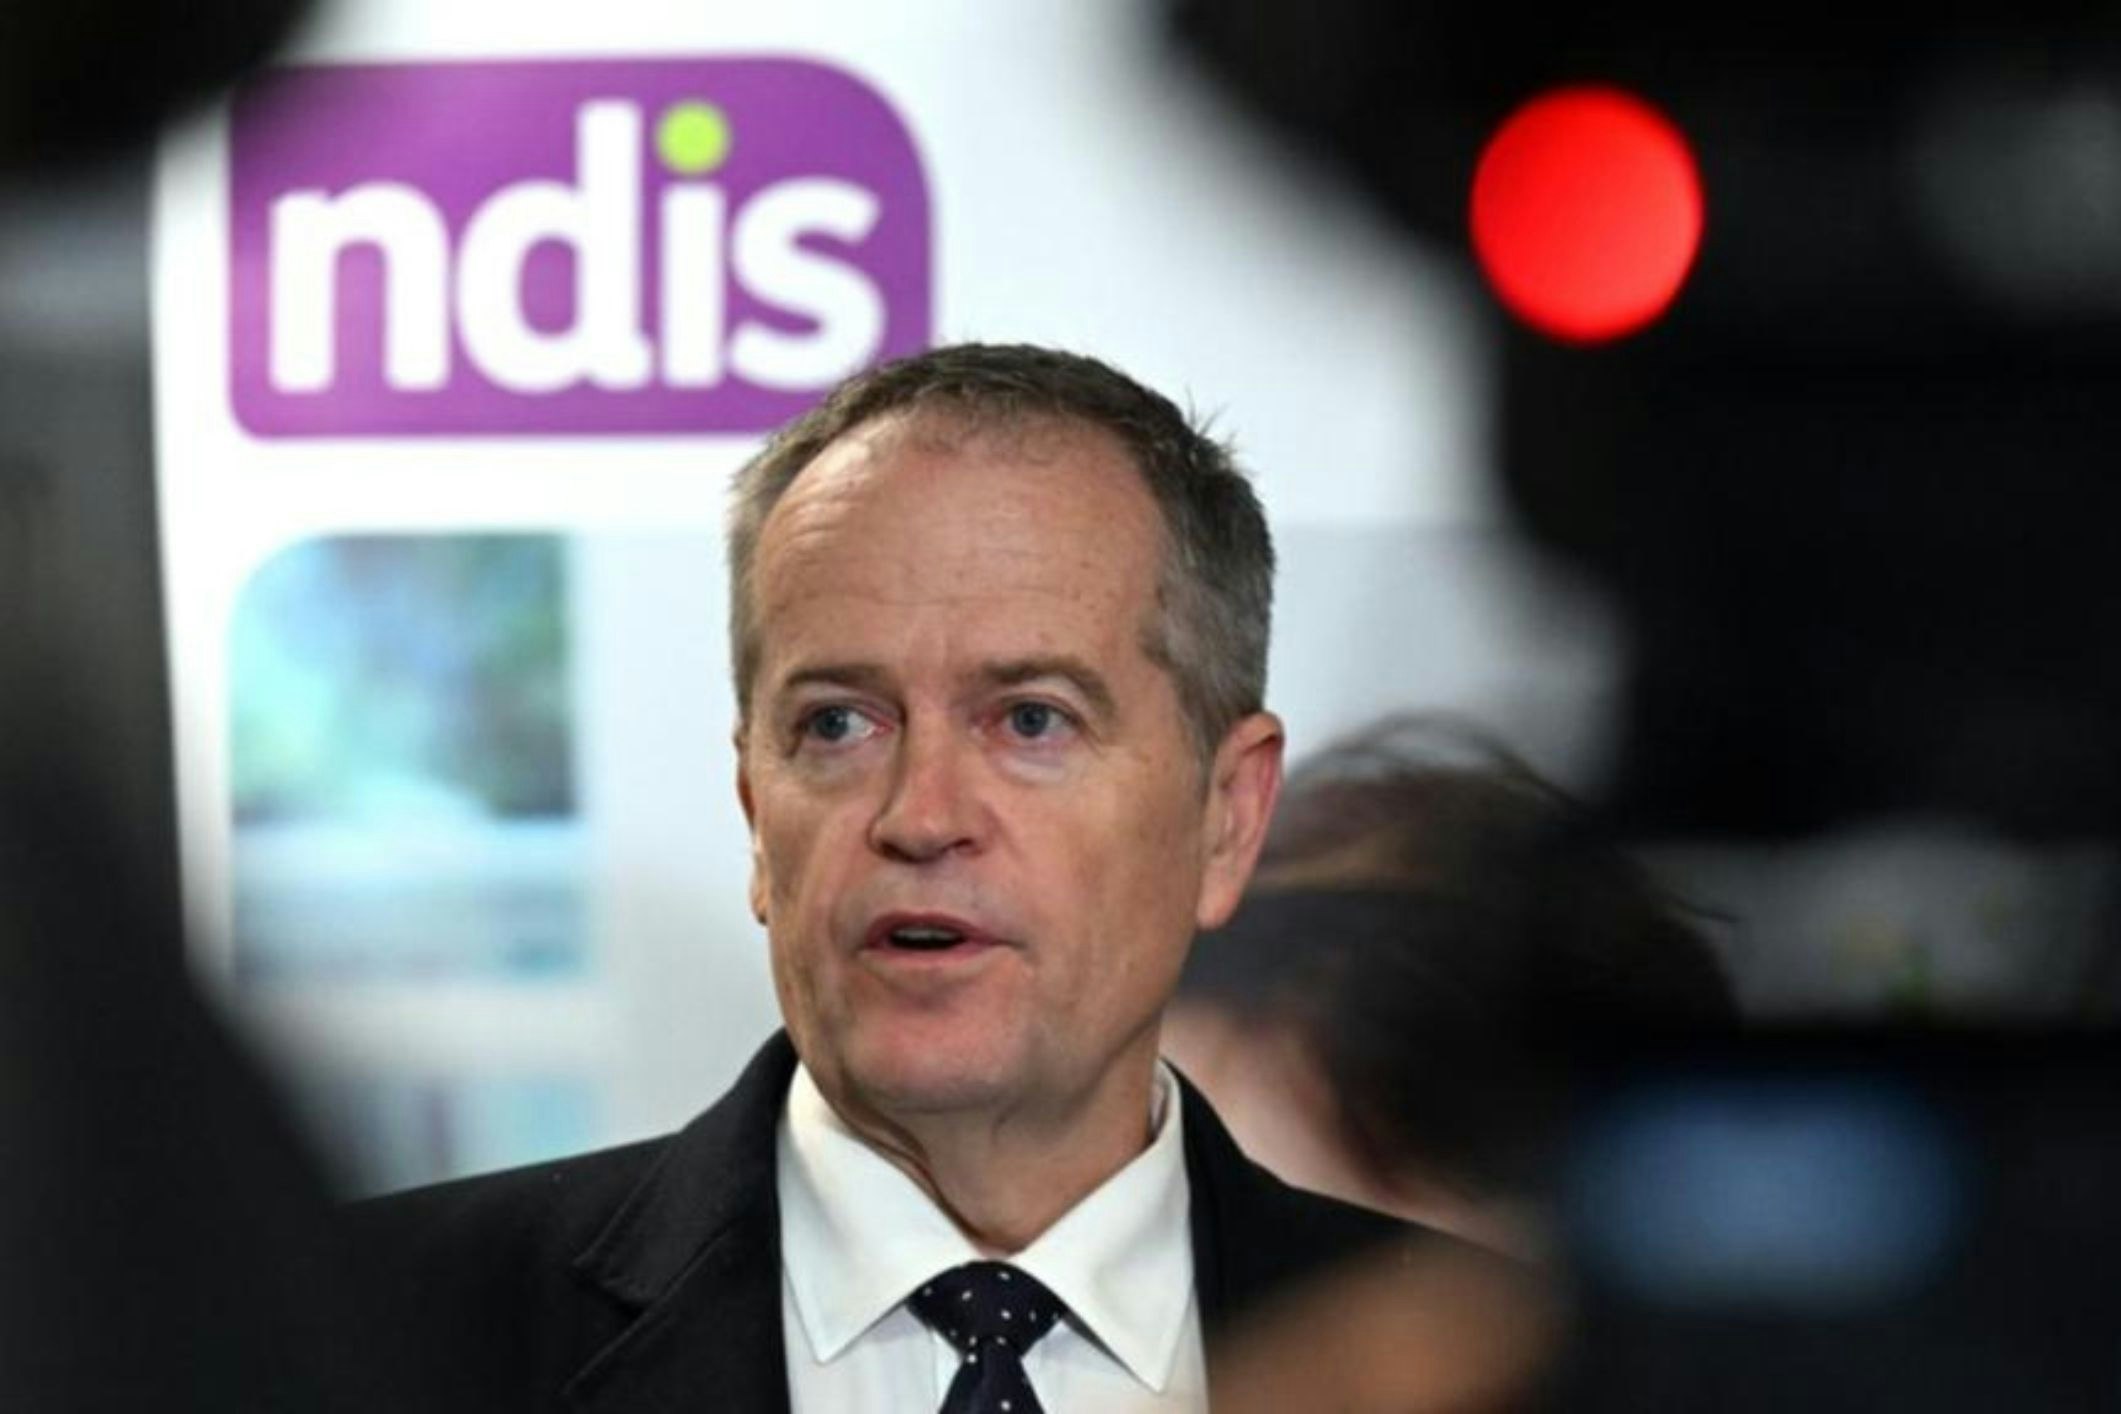 <p>National Disability Insurance Scheme [NDIS] Minister Bill Shorten adamantly denounced support for attention-deficit hyperactivity disorder [ADHD] as a pathway to support through Government funds. [Image courtesy of Mick Tsikas via Australian Associated Press]</p>
